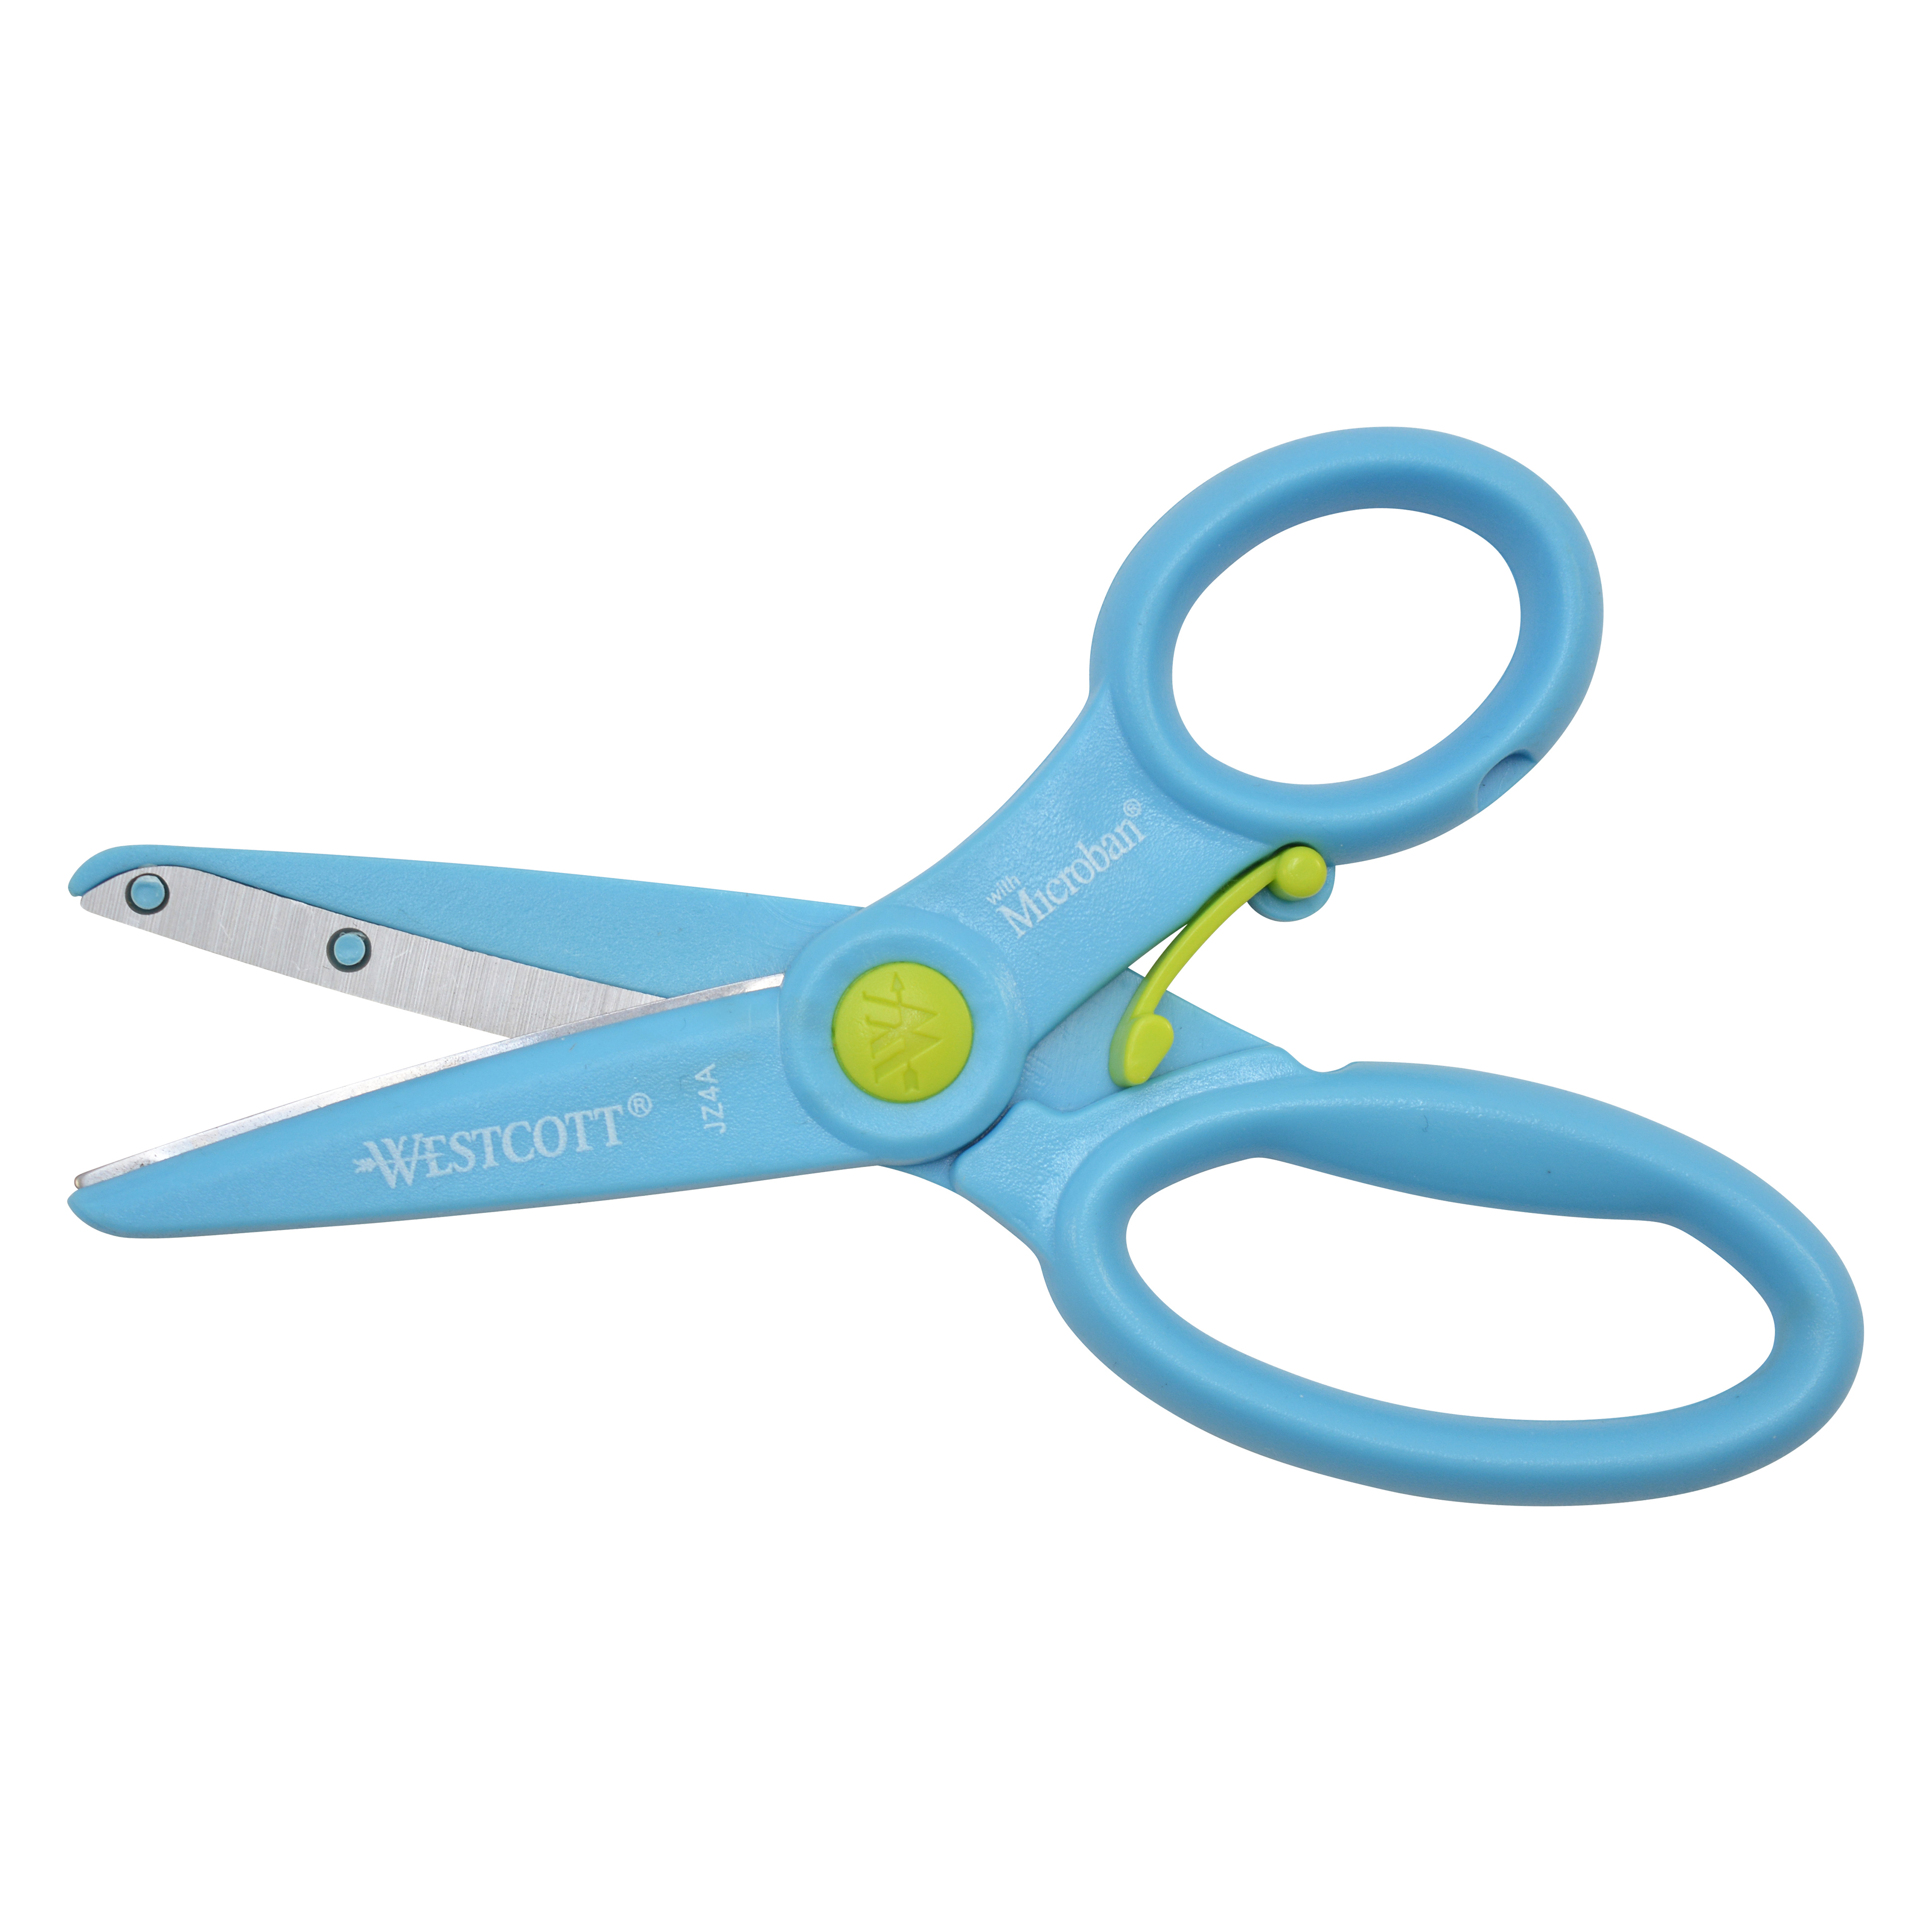 Westcott Preschool Training Scissors with Anti-Microbial Protection, Assorted Colors (15663)